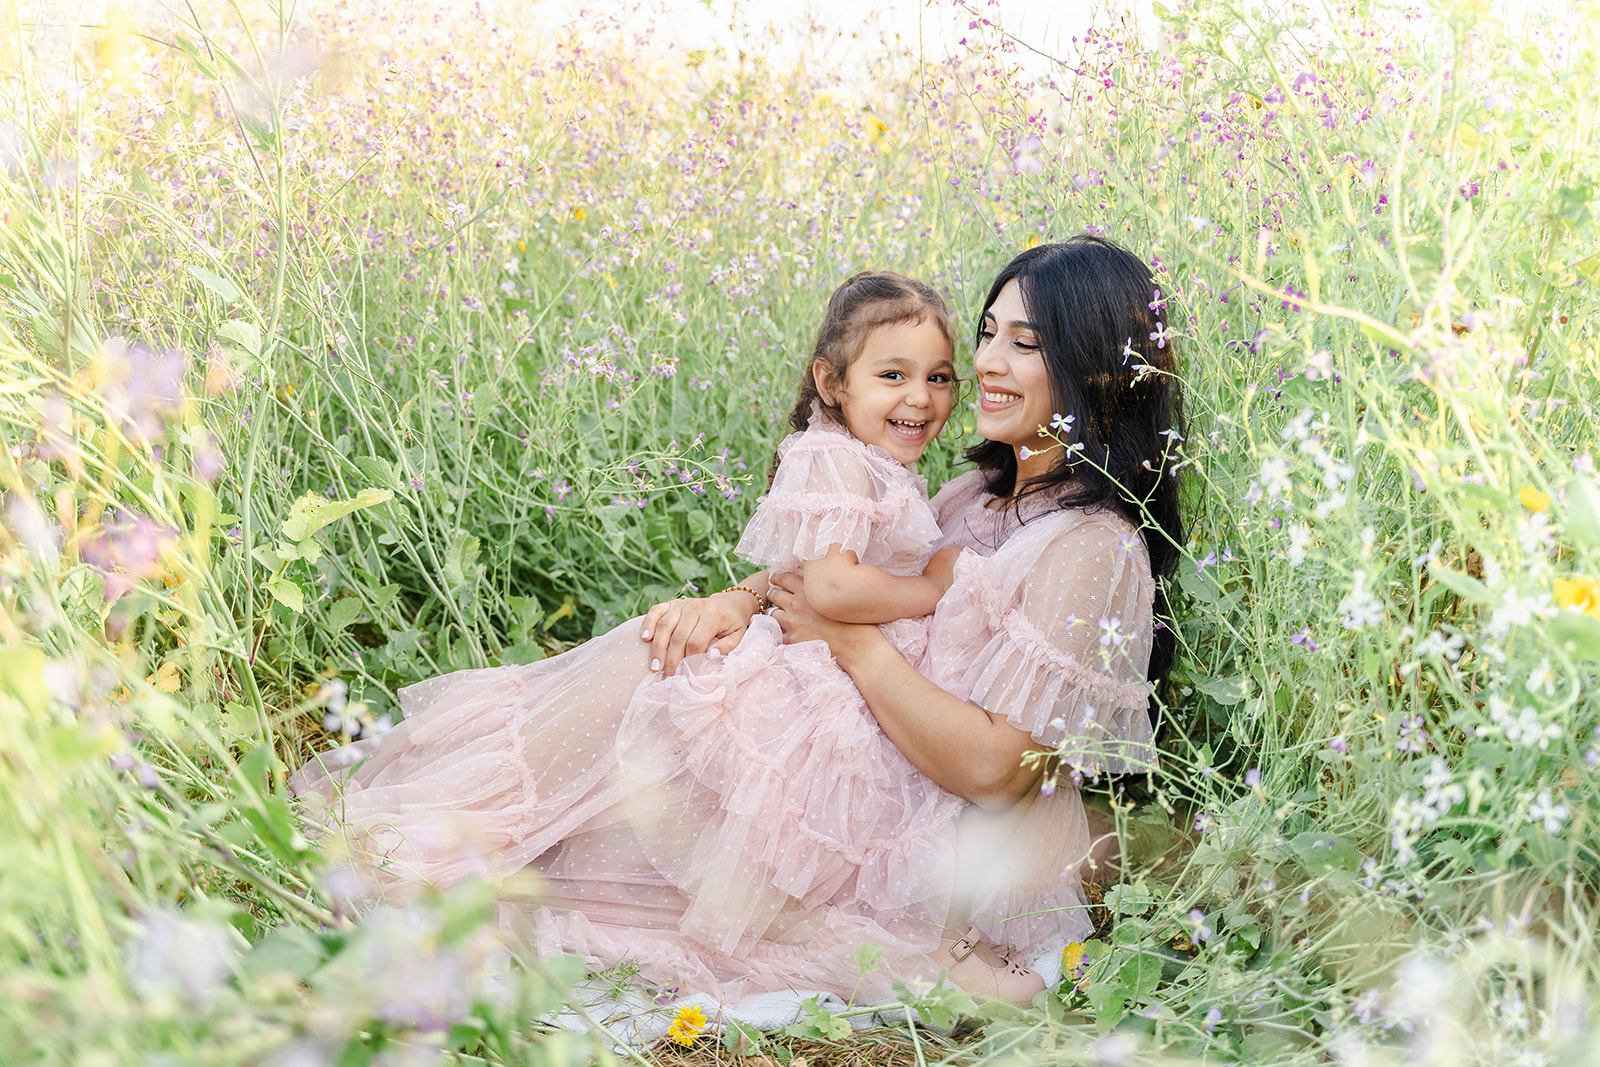 A young girl in a pink dress sits on mom's lap laughing surrounded by wildflowers